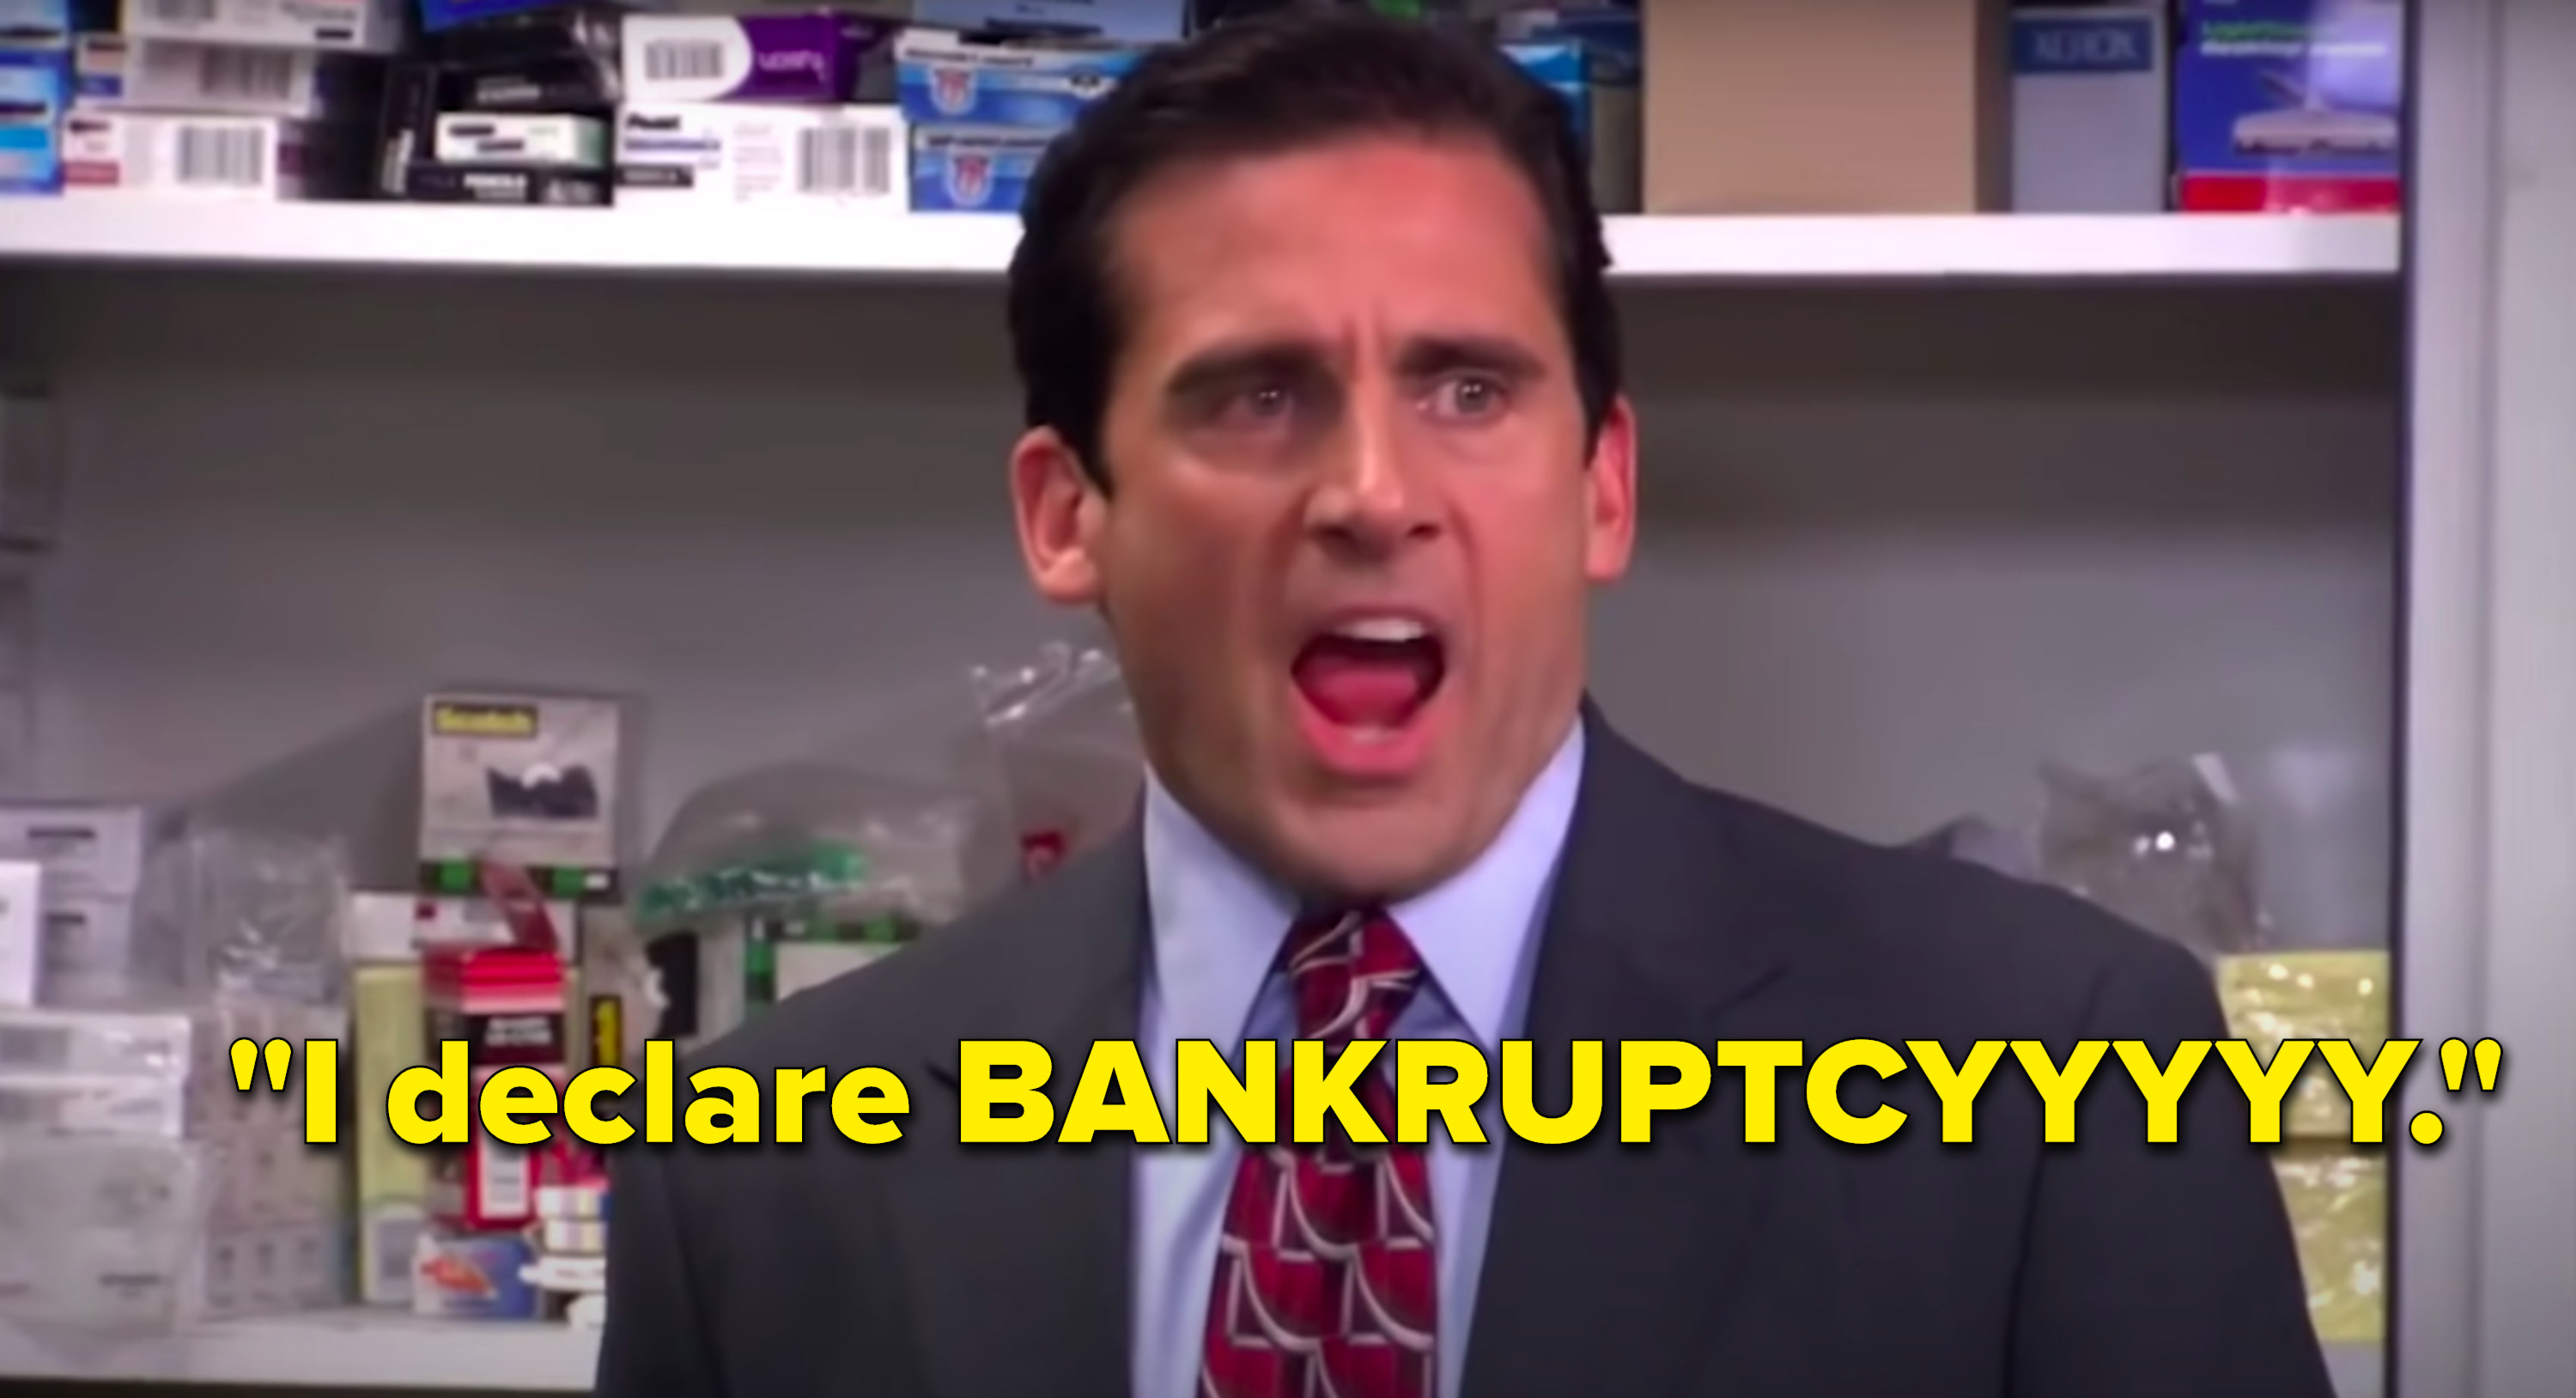 Michael yells into the office I declare BANKRUPTCYYYY